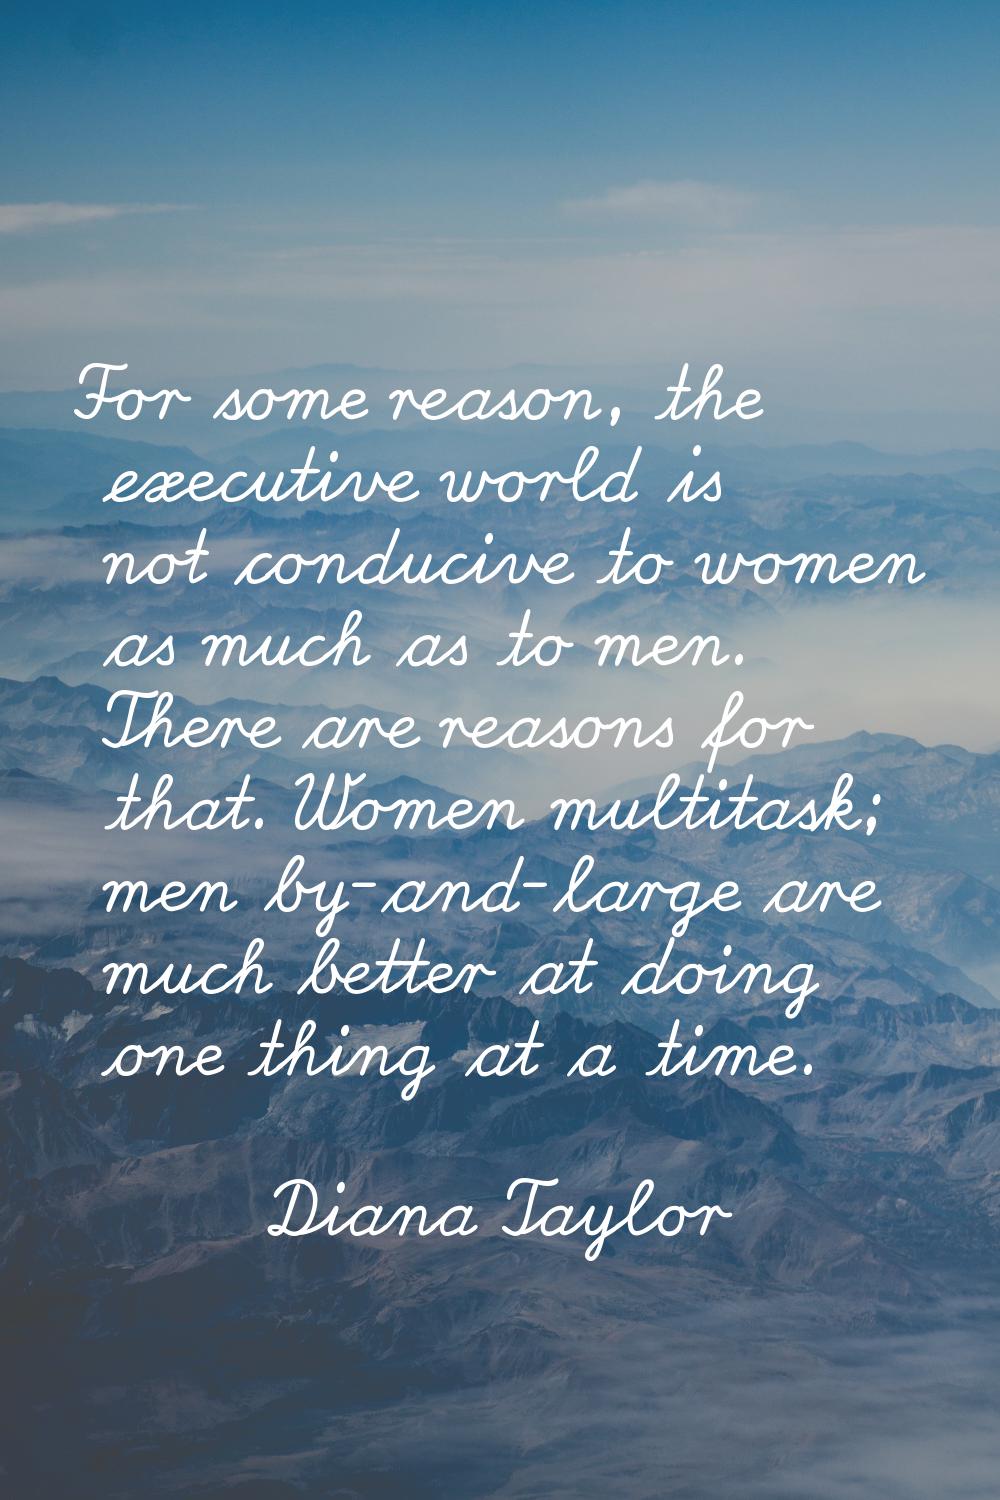 For some reason, the executive world is not conducive to women as much as to men. There are reasons